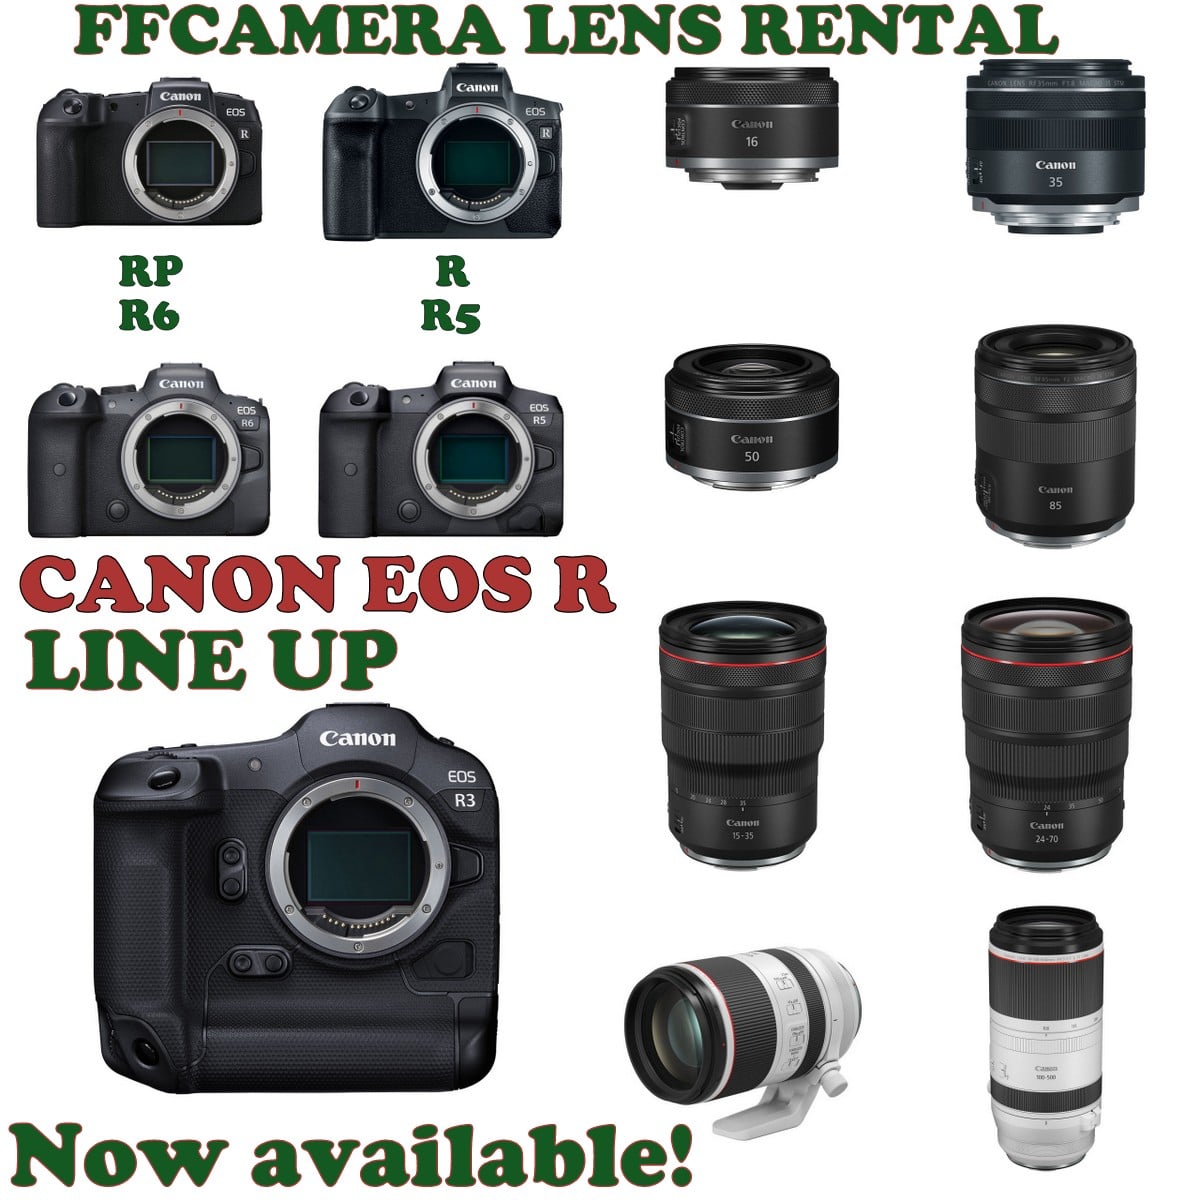 NOW AVAILABLE AT FFCAMERA LENS RENTAL R3 R5 R6 R RP RF 15-35mm F2.8 L IS RF 24-70mm F2.8 L IS RF 70-200mm F2.8 L IS RF 100-500mm F4.5-7.1 L IS and more PM for more info or refer pricelist